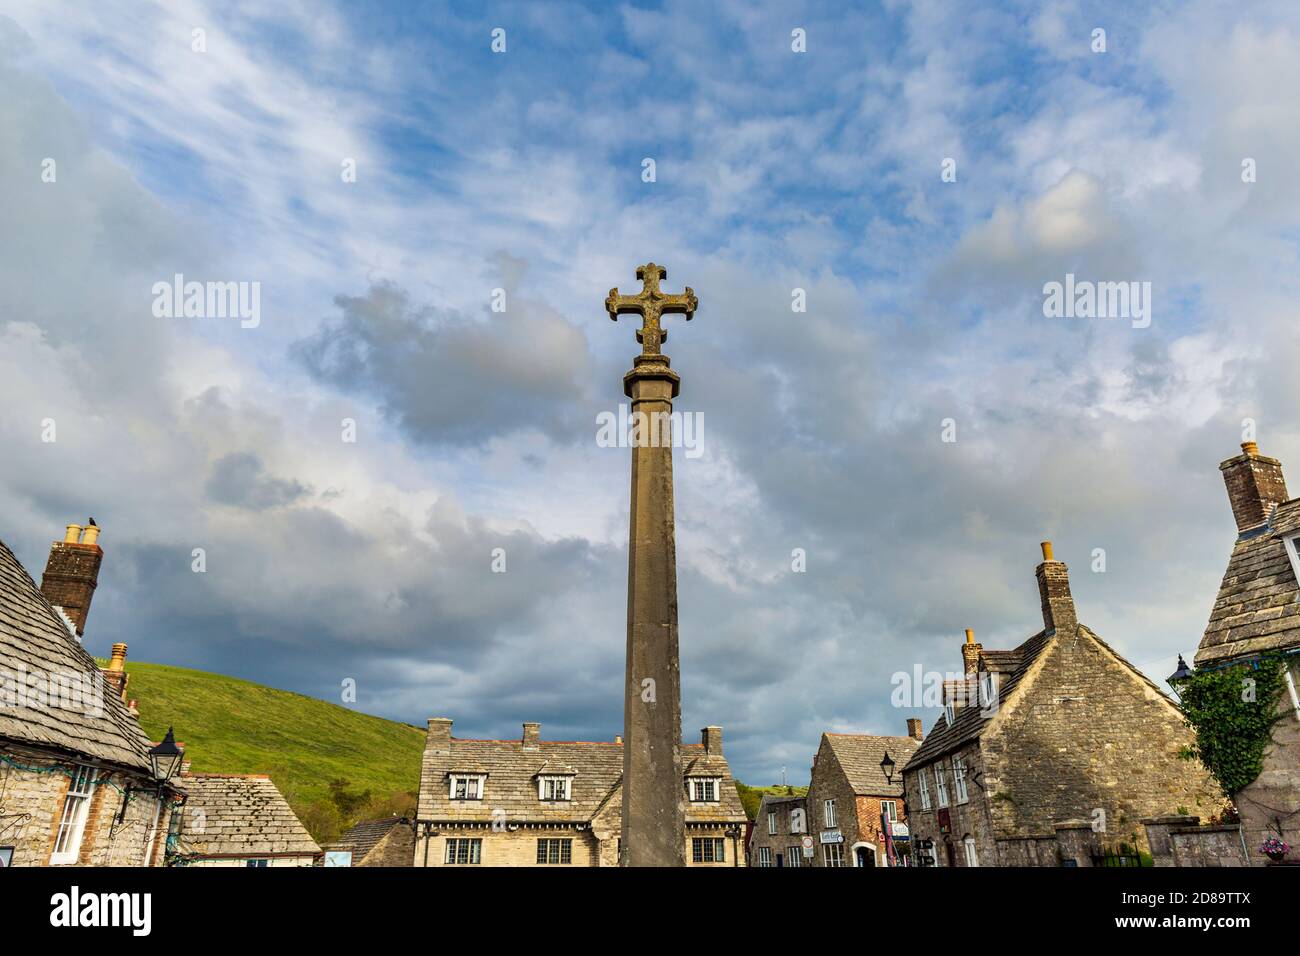 The War Memorial in "The Square" at Corfe village in Dorset, England Stock Photo